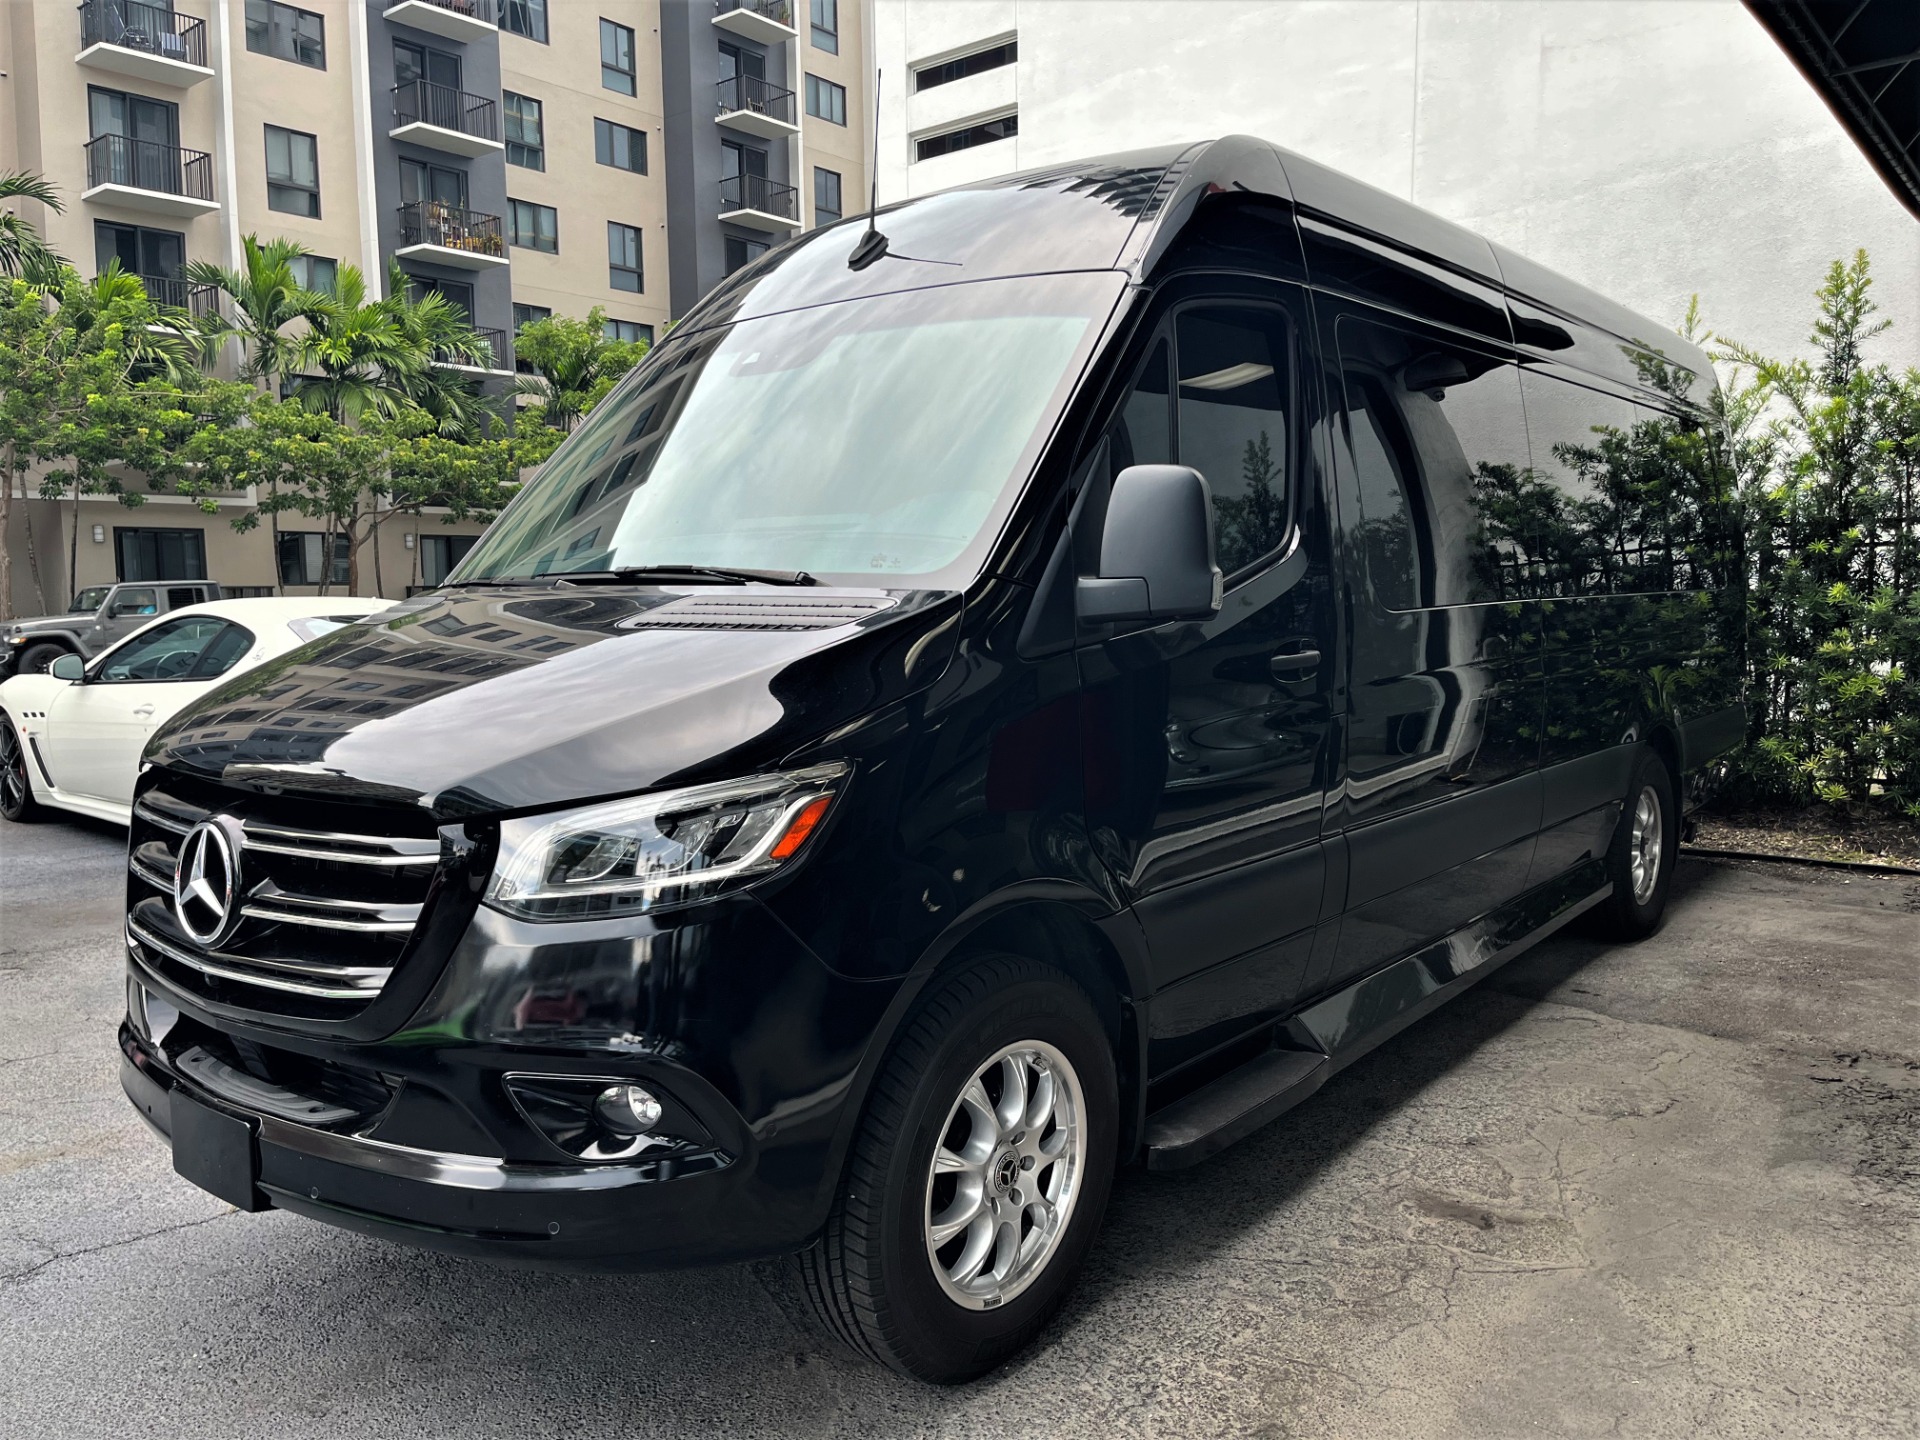 Used 2020 Mercedes-Benz Sprinter Cargo 3500 for sale $239,850 at The Gables Sports Cars in Miami FL 33146 2